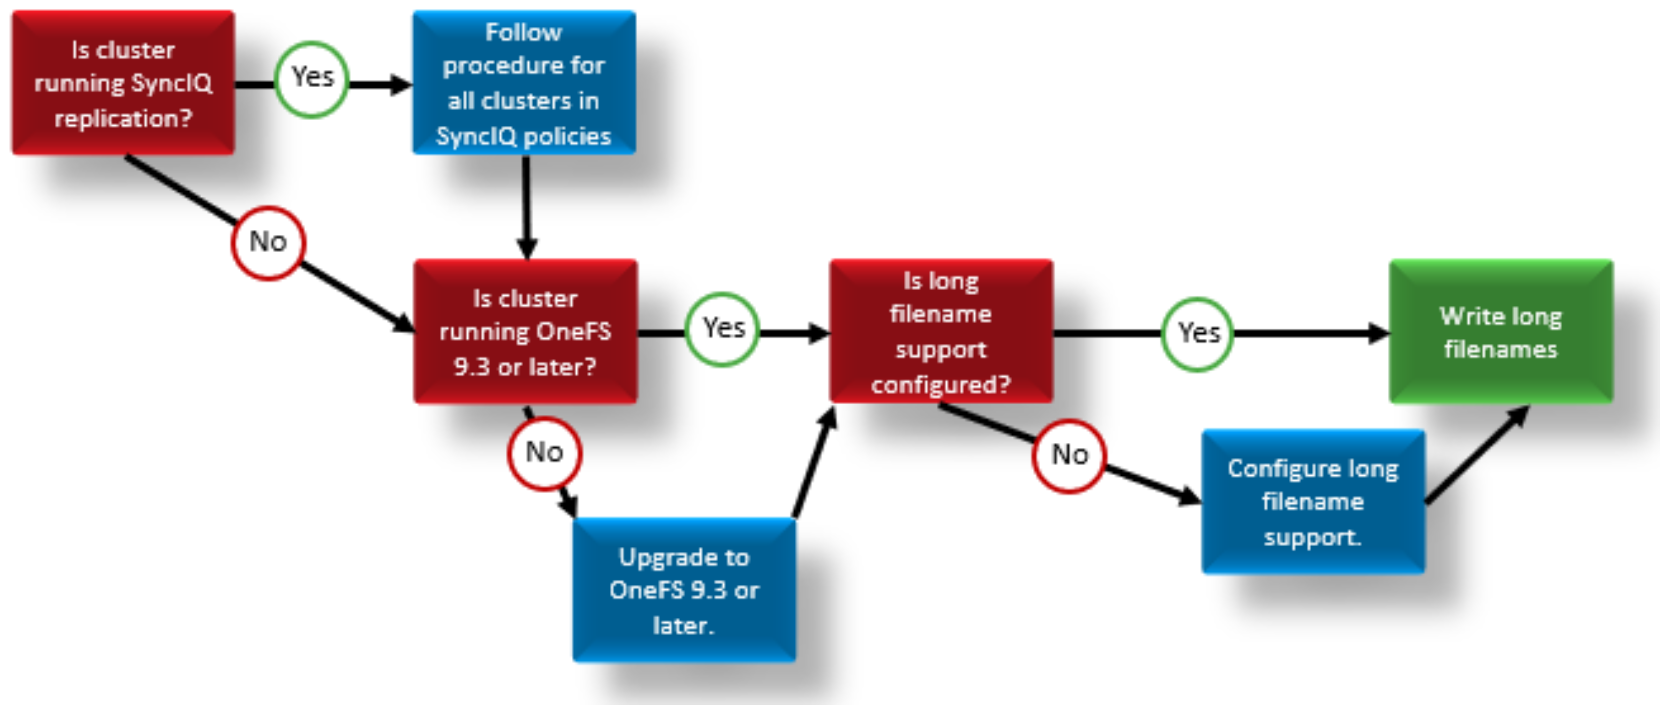 Long filename support configuration decision tree. Cluster must be running SyncIQ replication, running OneFS 9.3 or later, with support configured to write.